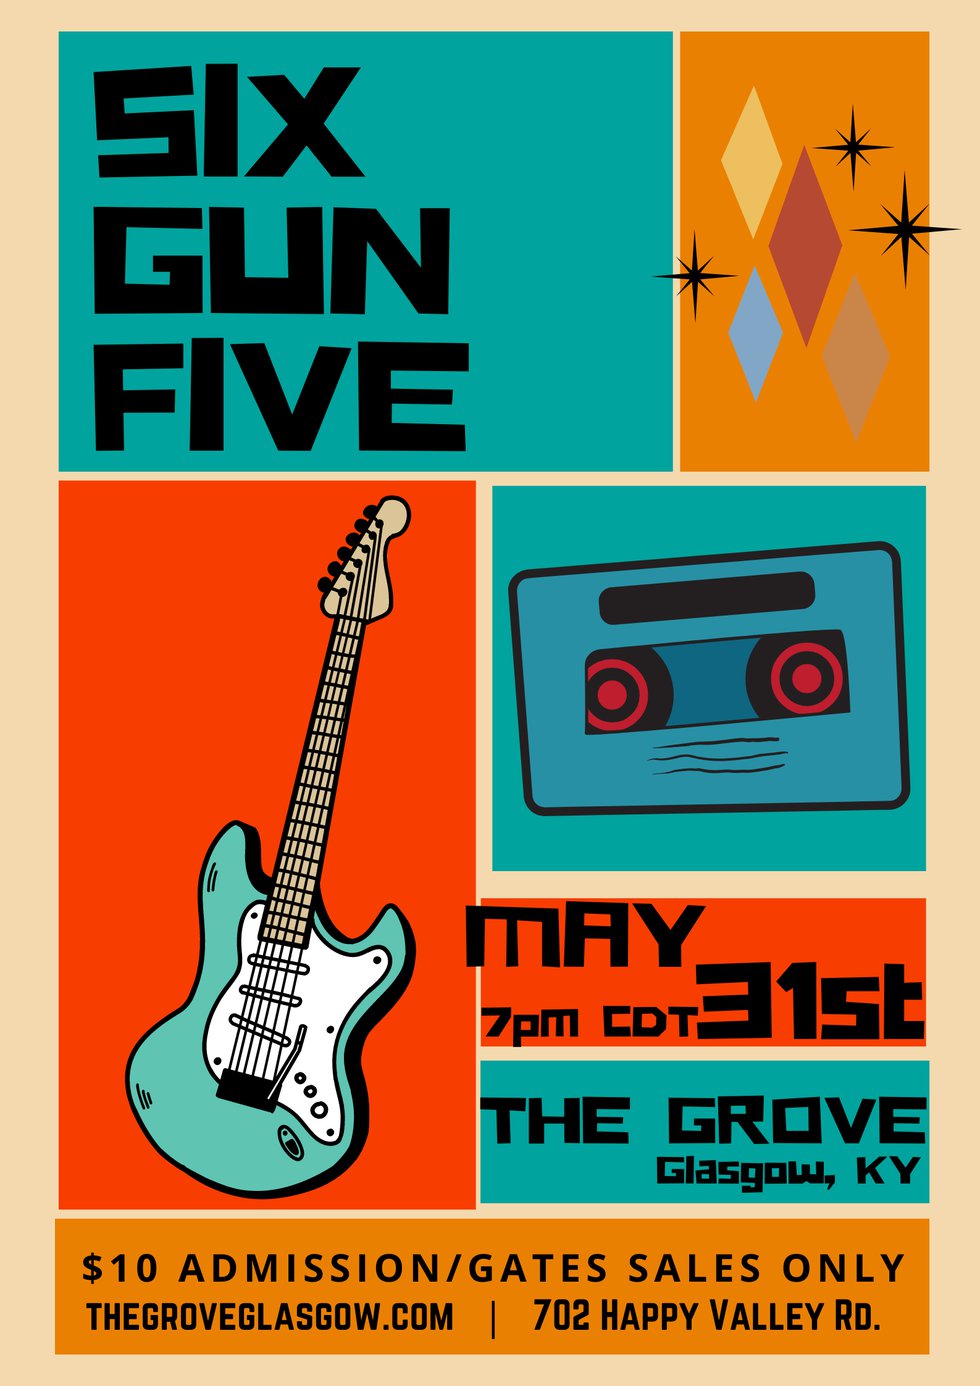 Six Gun Five - Colorful Simple Illustrated Jazz Music Concert Poster